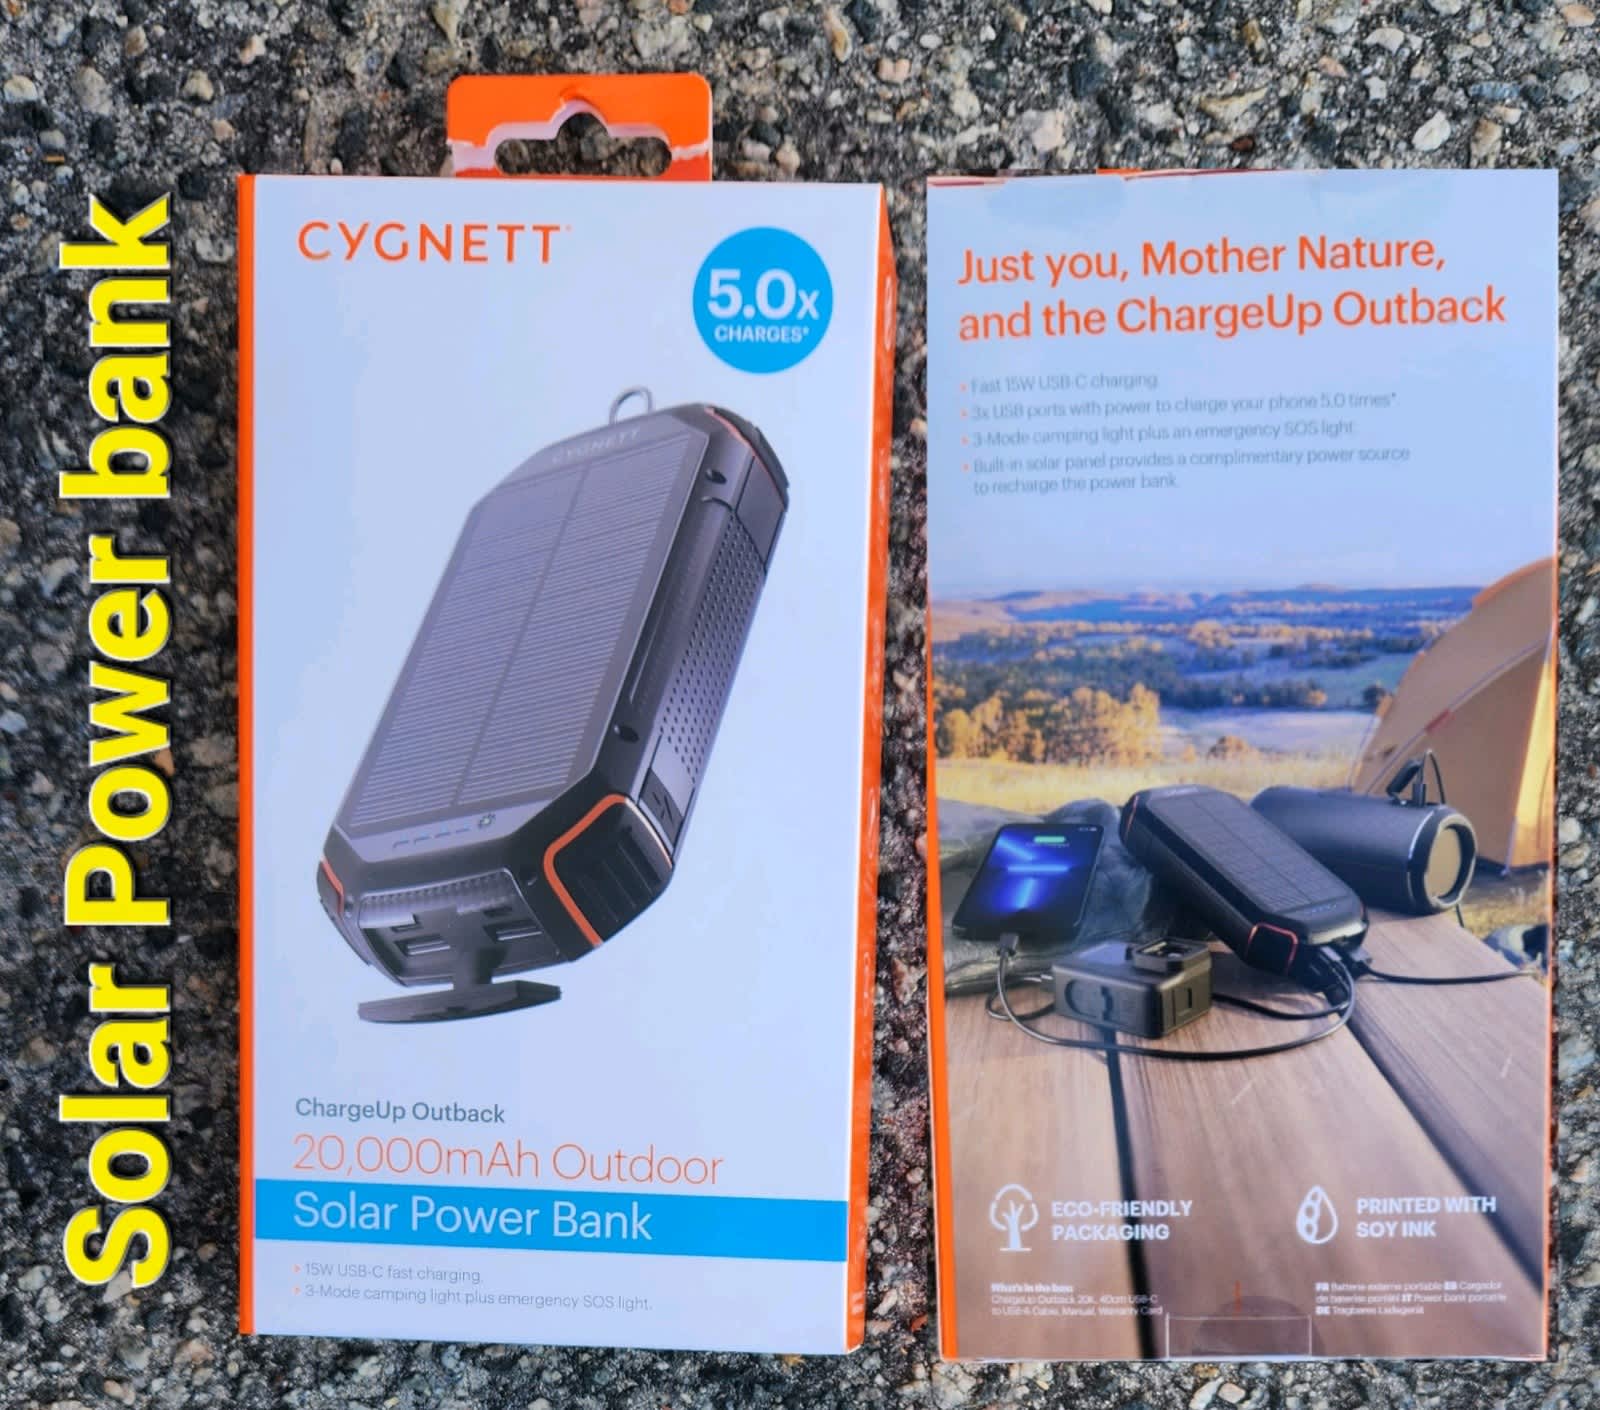 Cygnett ChargeUp Outback 20,000mAh Outdoor Solar Power Bank Black